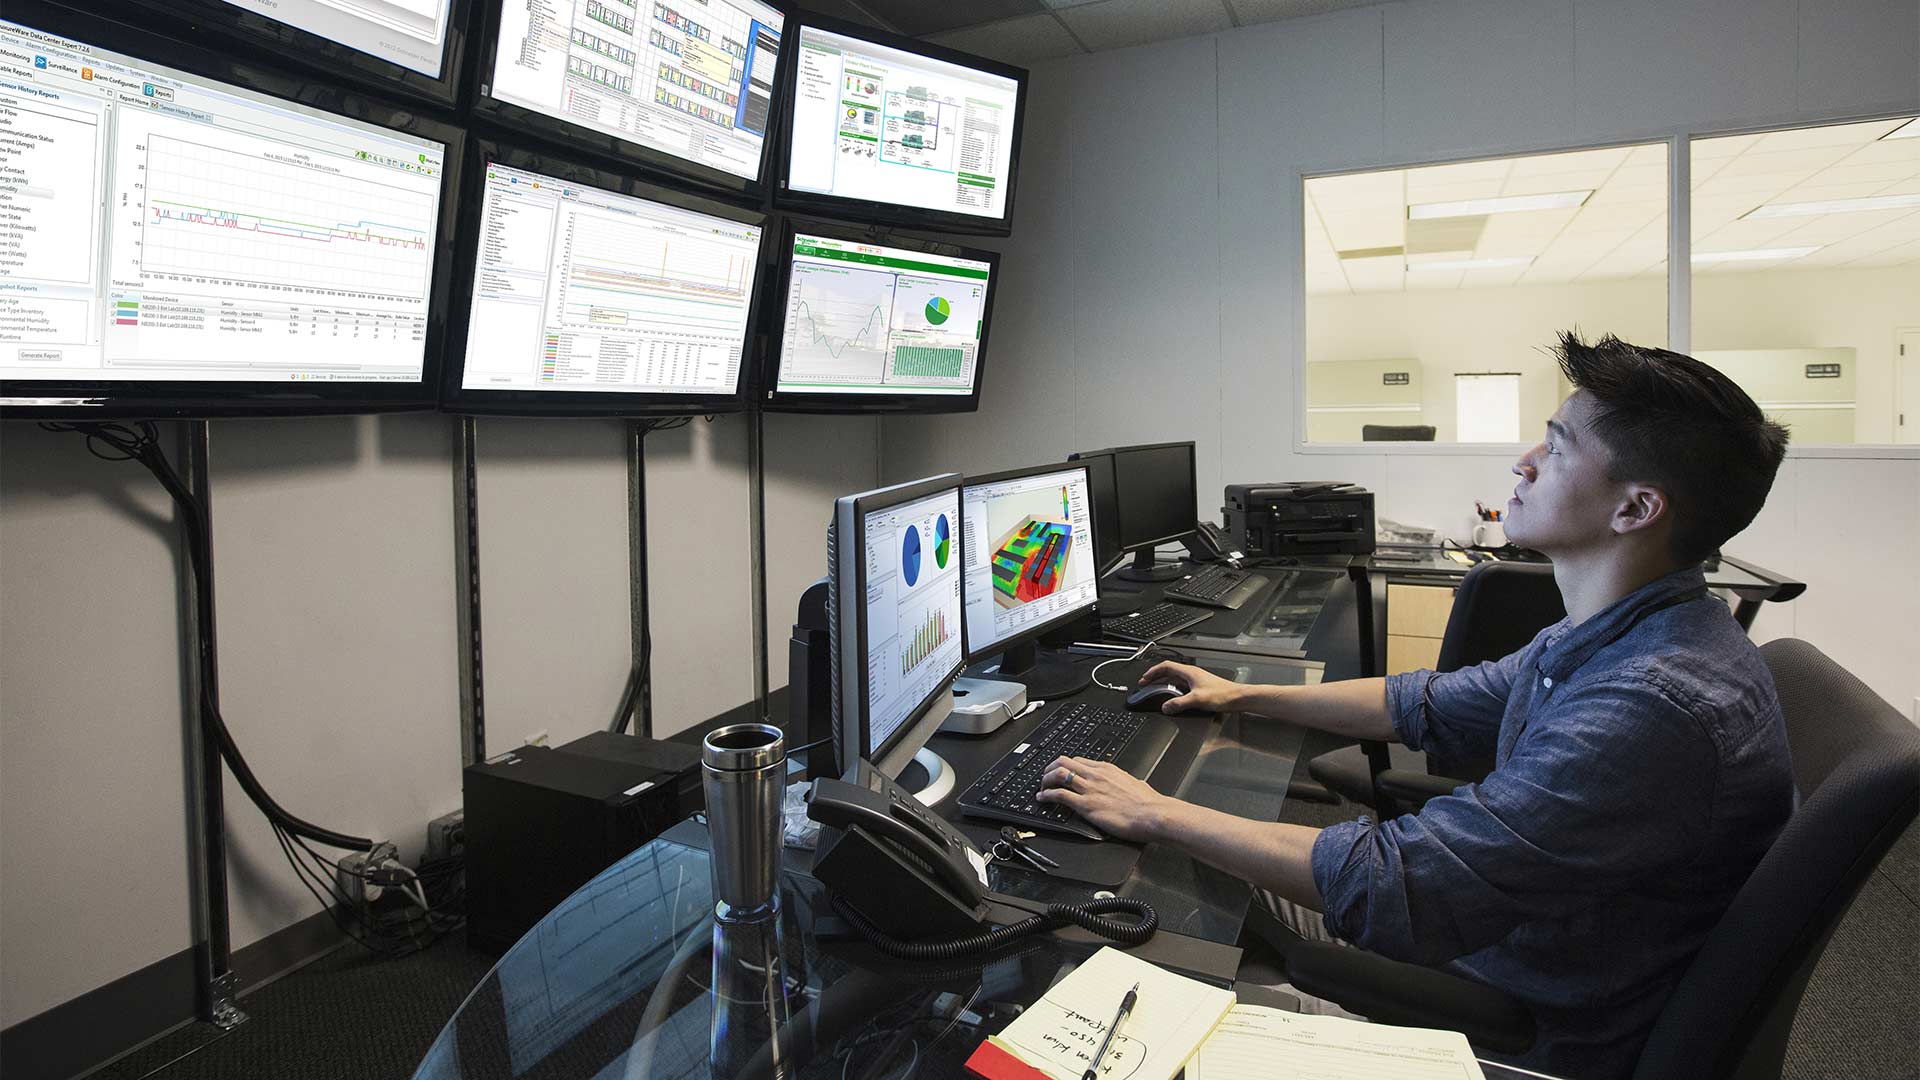 Employee working at a control room with many screens in front